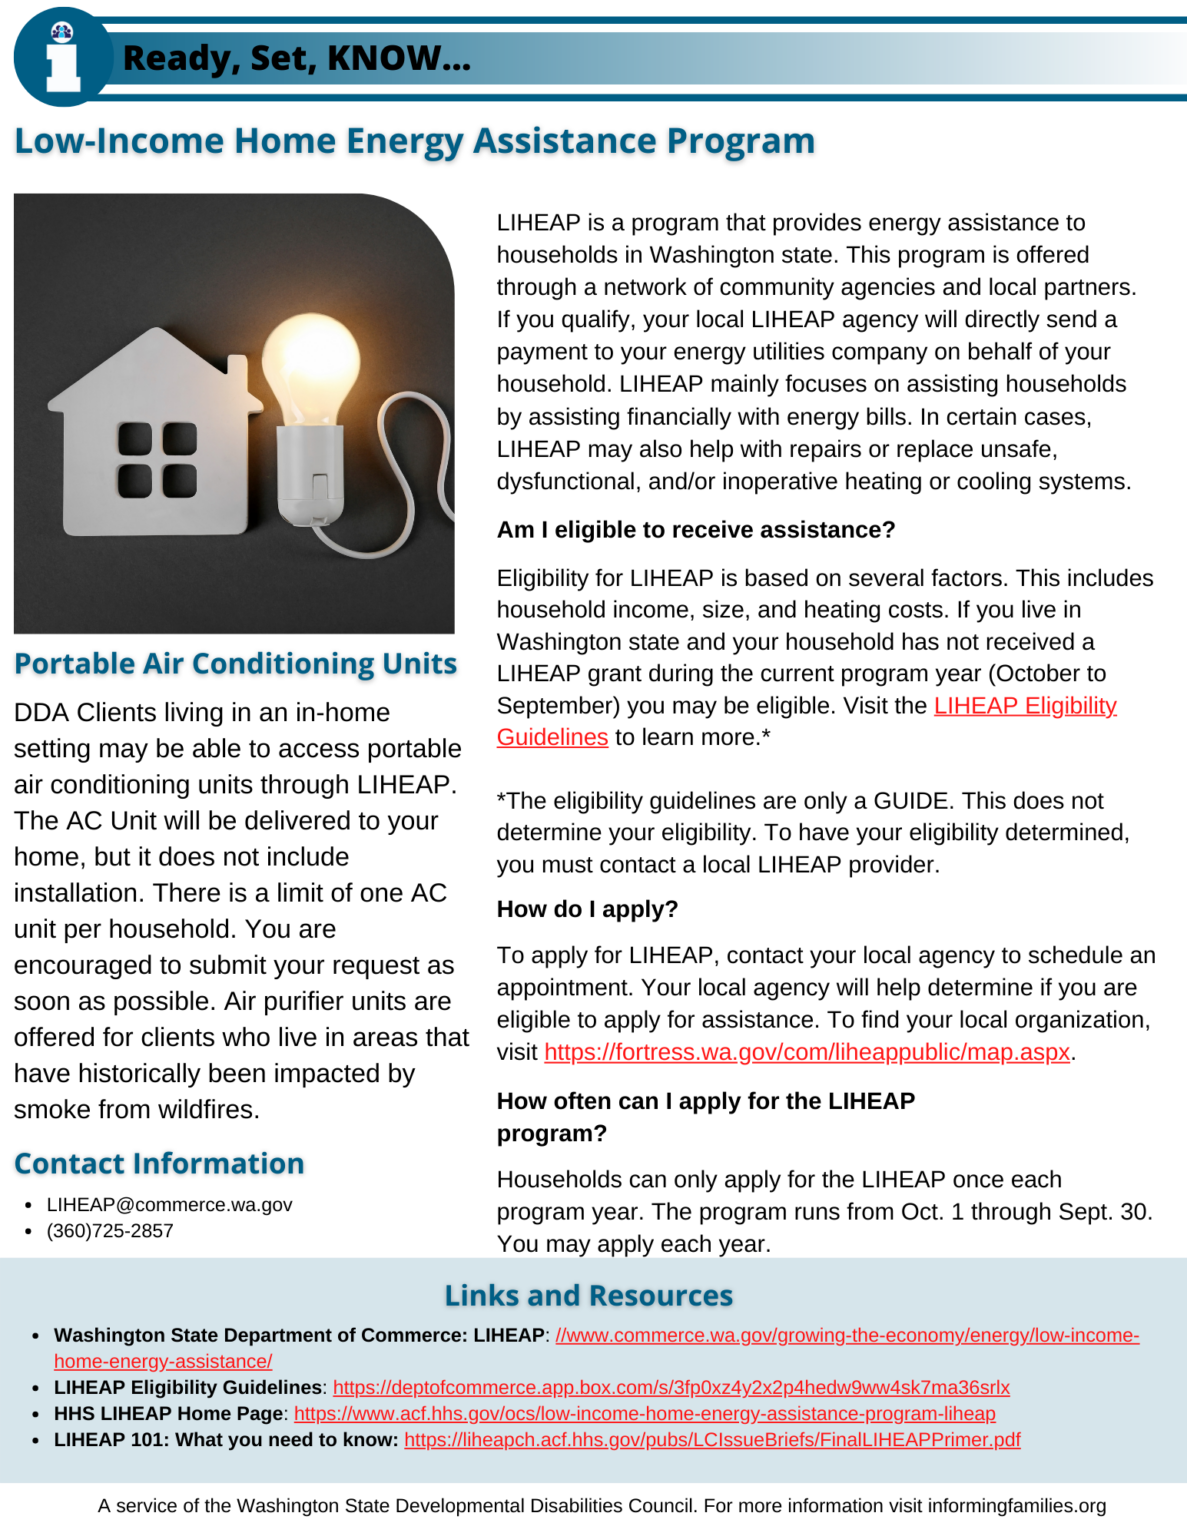 Low Income Home Energy Assistance Program Informing Families 0153